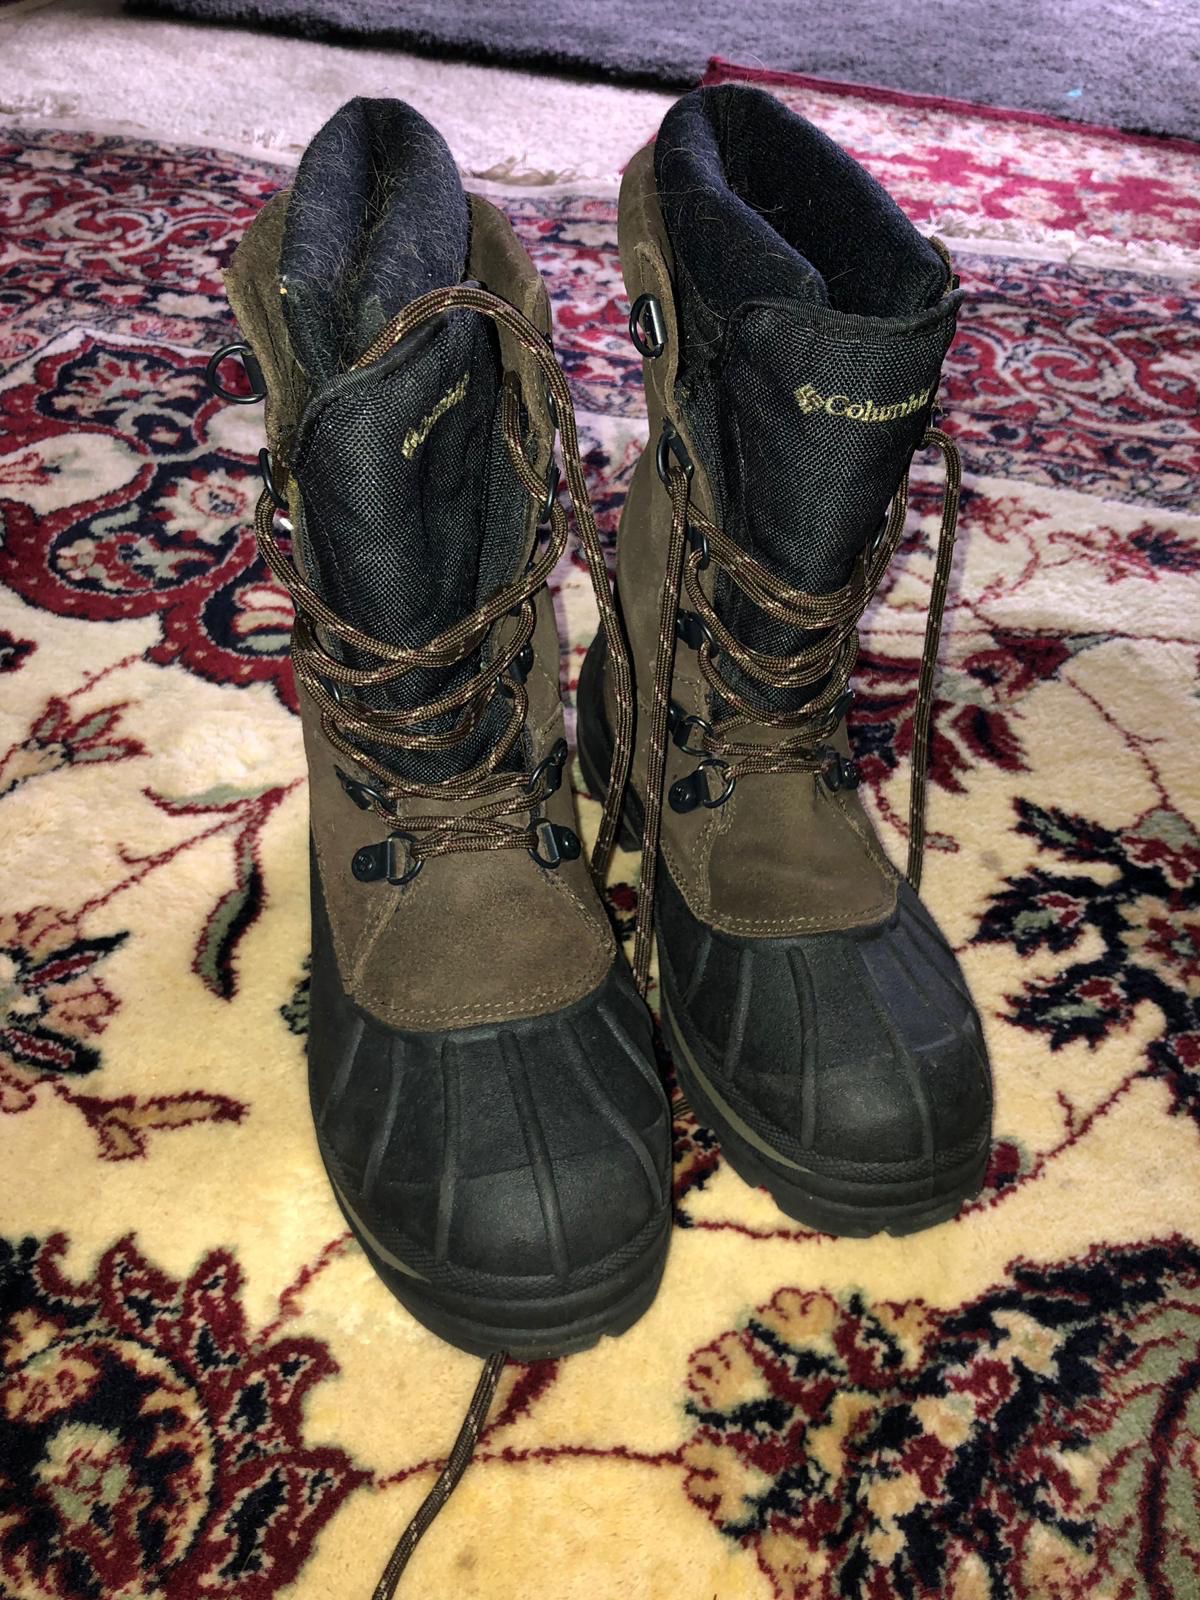 COLUMBIAN BOOTS FOR MEN SIZE 8